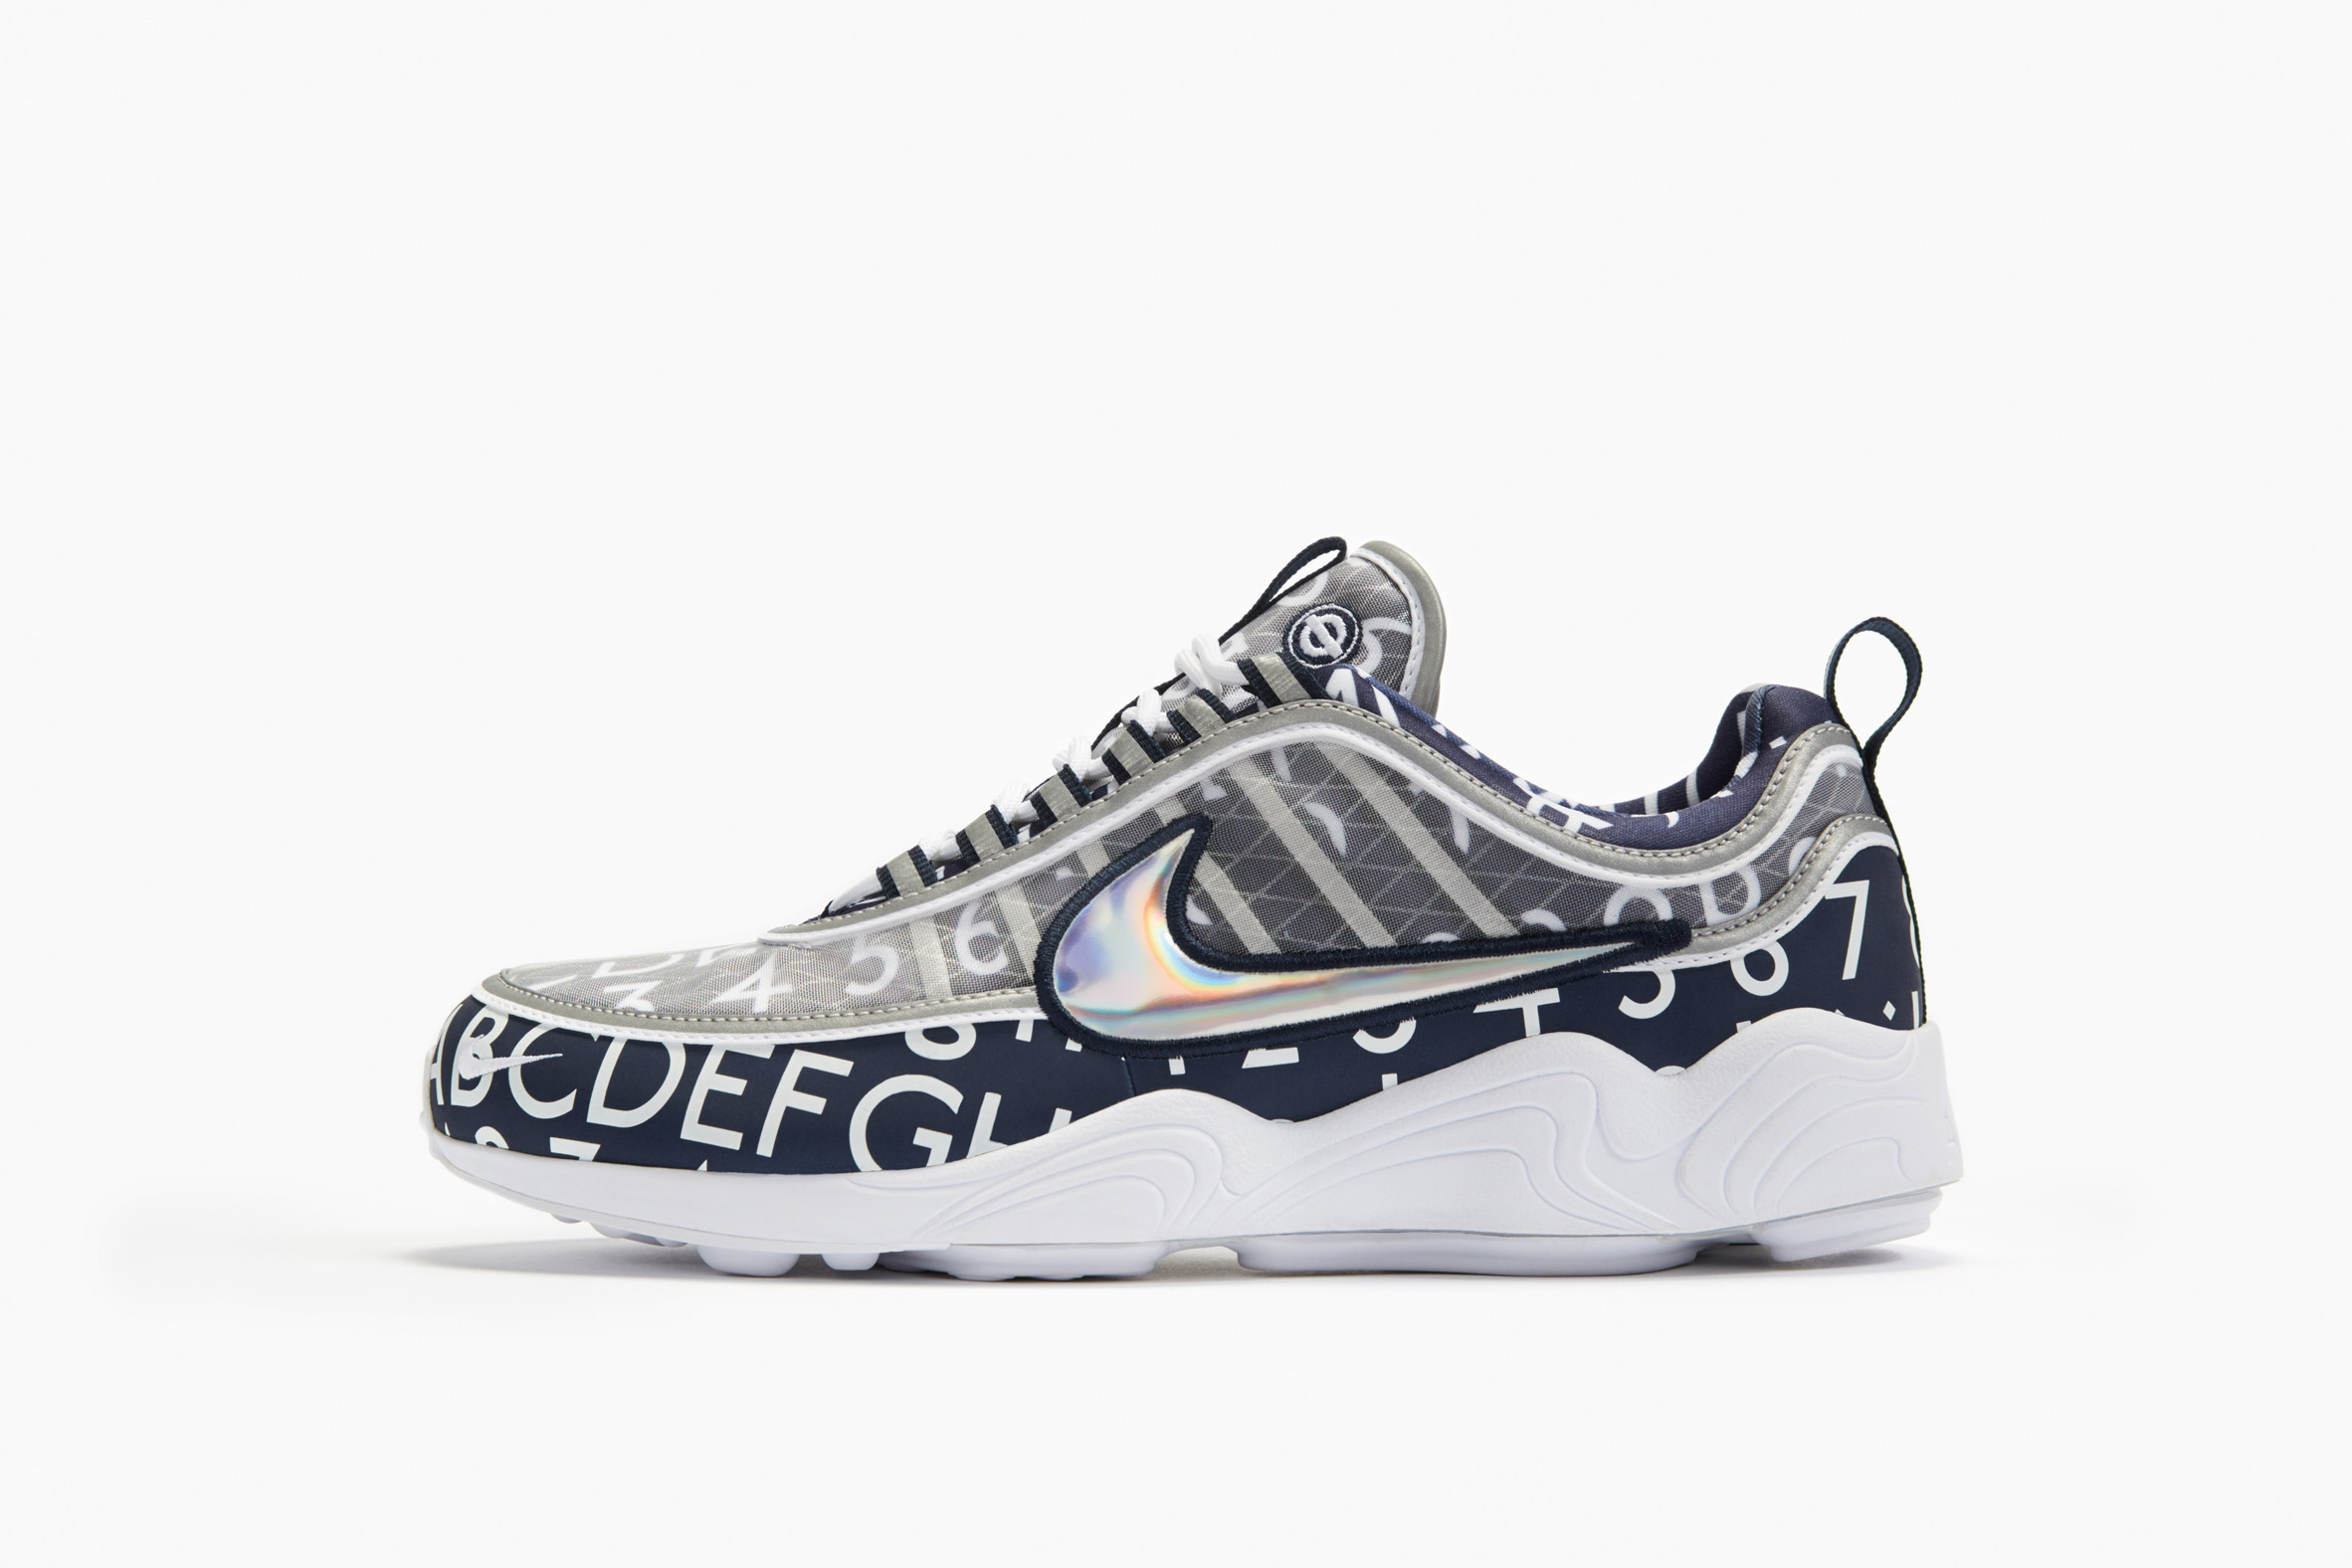 Nike's Zoom Spiridon have covered in London font